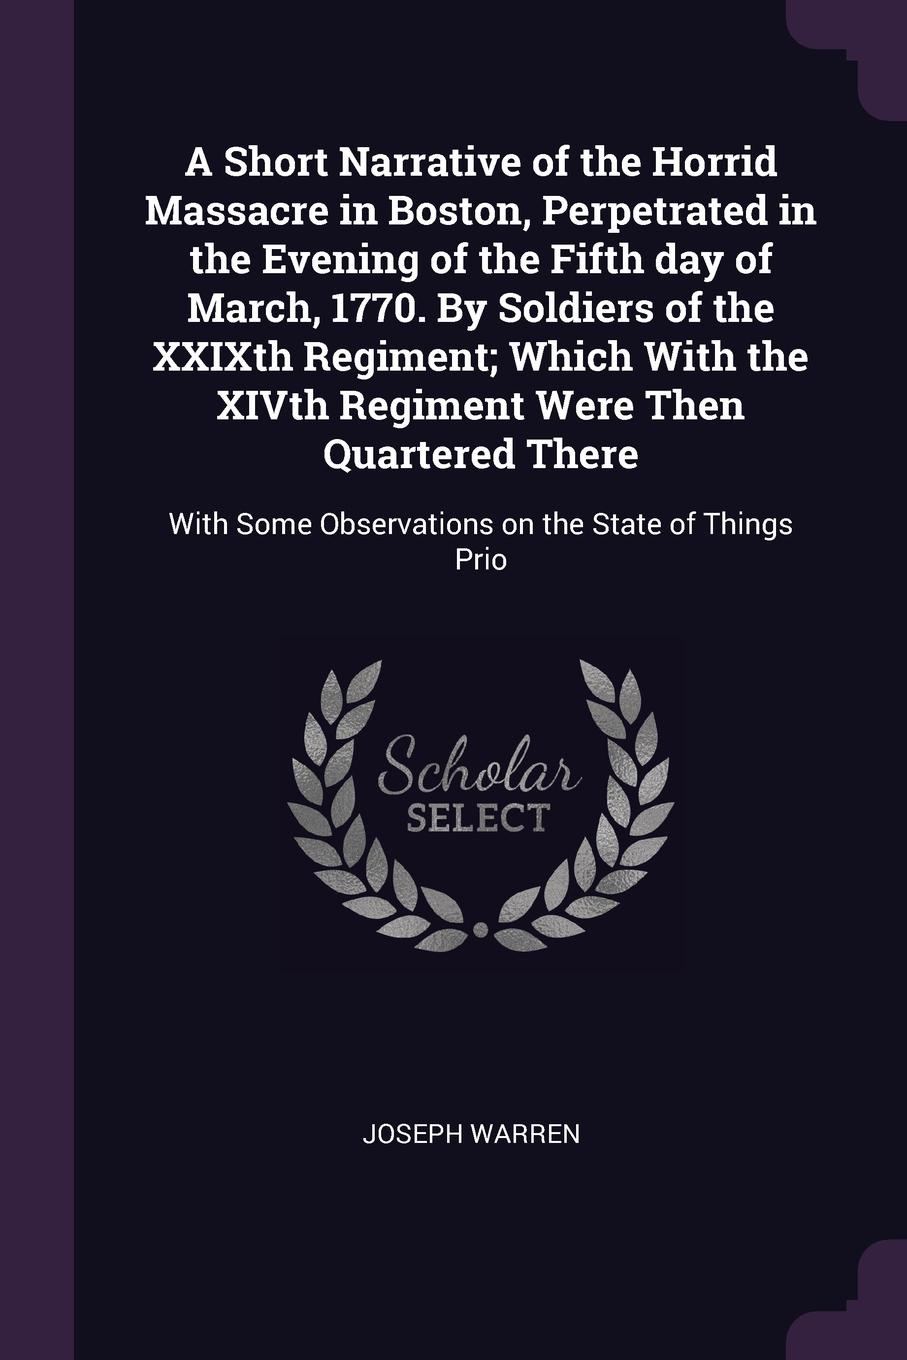 A Short Narrative of the Horrid Massacre in Boston, Perpetrated in the Evening of the Fifth day of March, 1770. By Soldiers of the XXIXth Regiment; Which With the XIVth Regiment Were Then Quartered There. With Some Observations on the State of Thi...